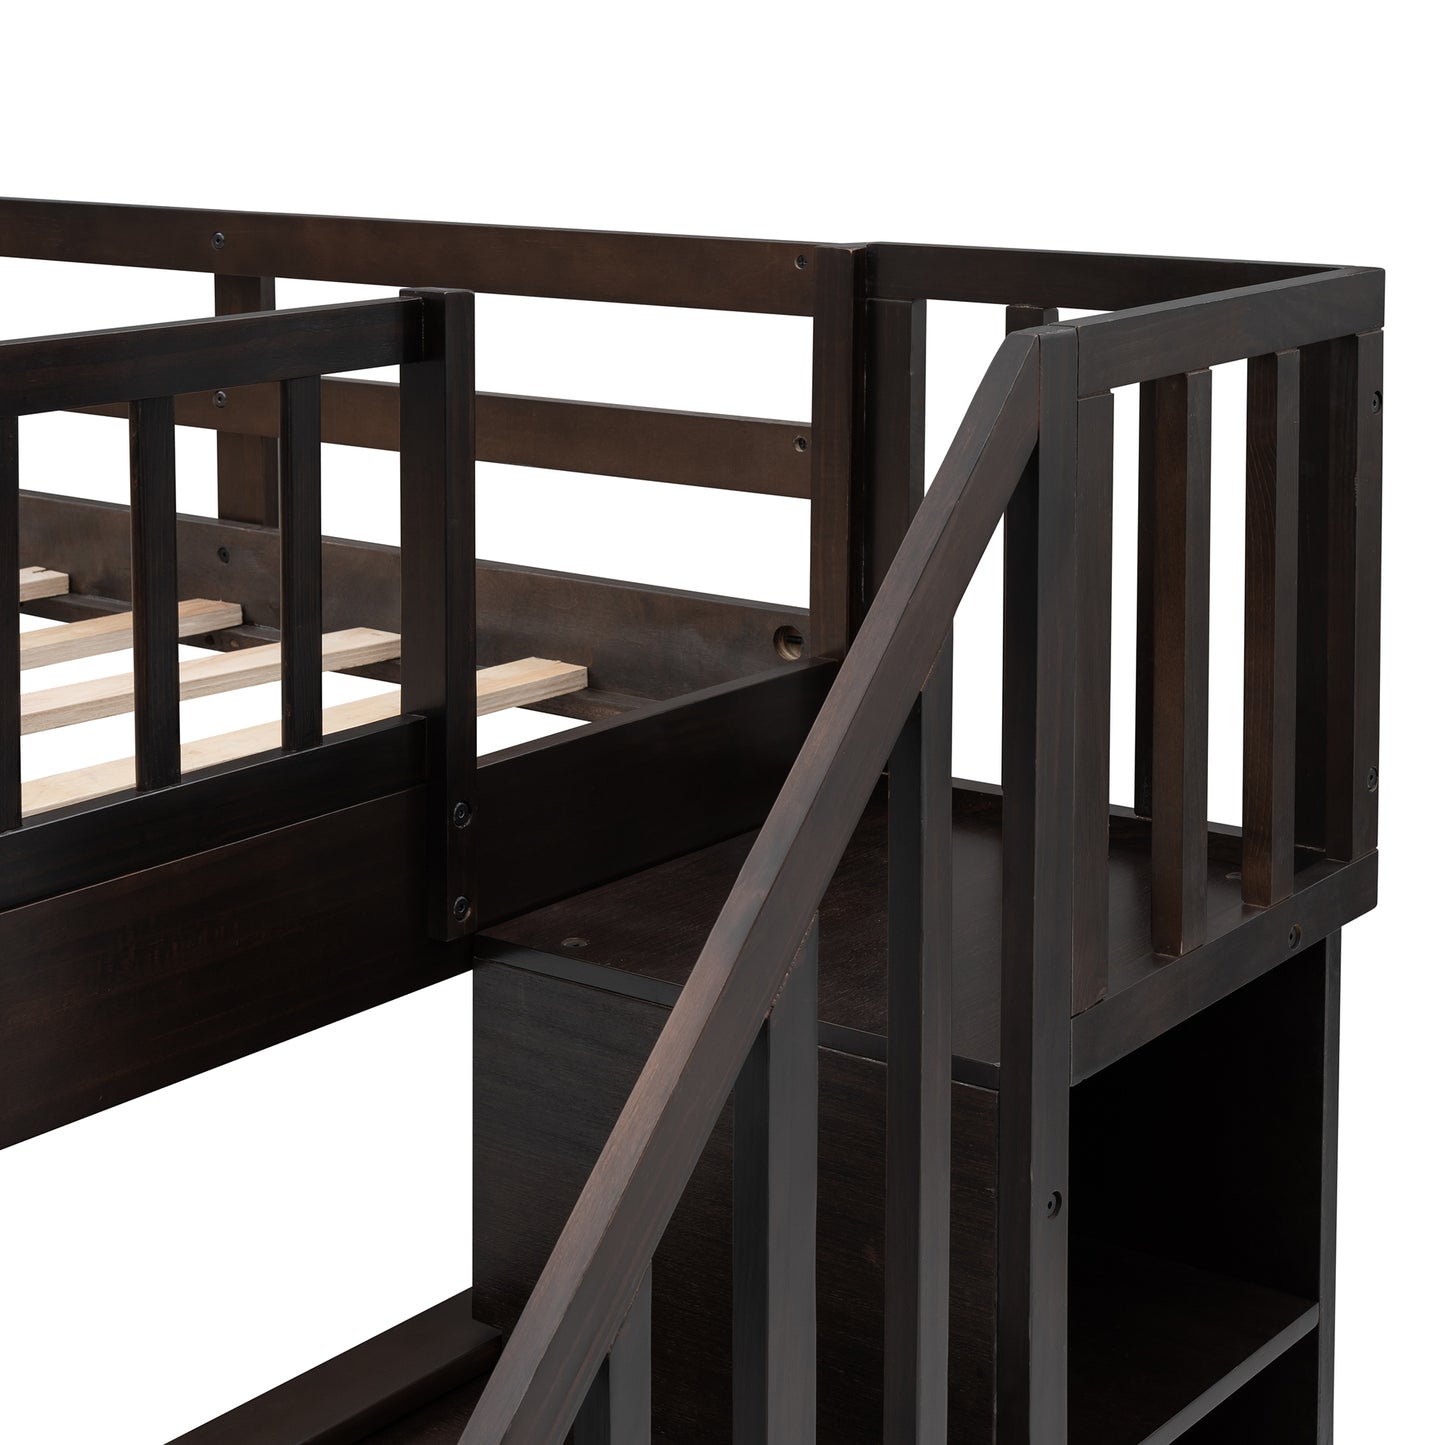 Stairway Full-Over-Full Bunk Bed with Twin size Trundle, Storage and Guard Rail for Bedroom, Dorm - Espresso(OLD SKU :LP001210AAP)